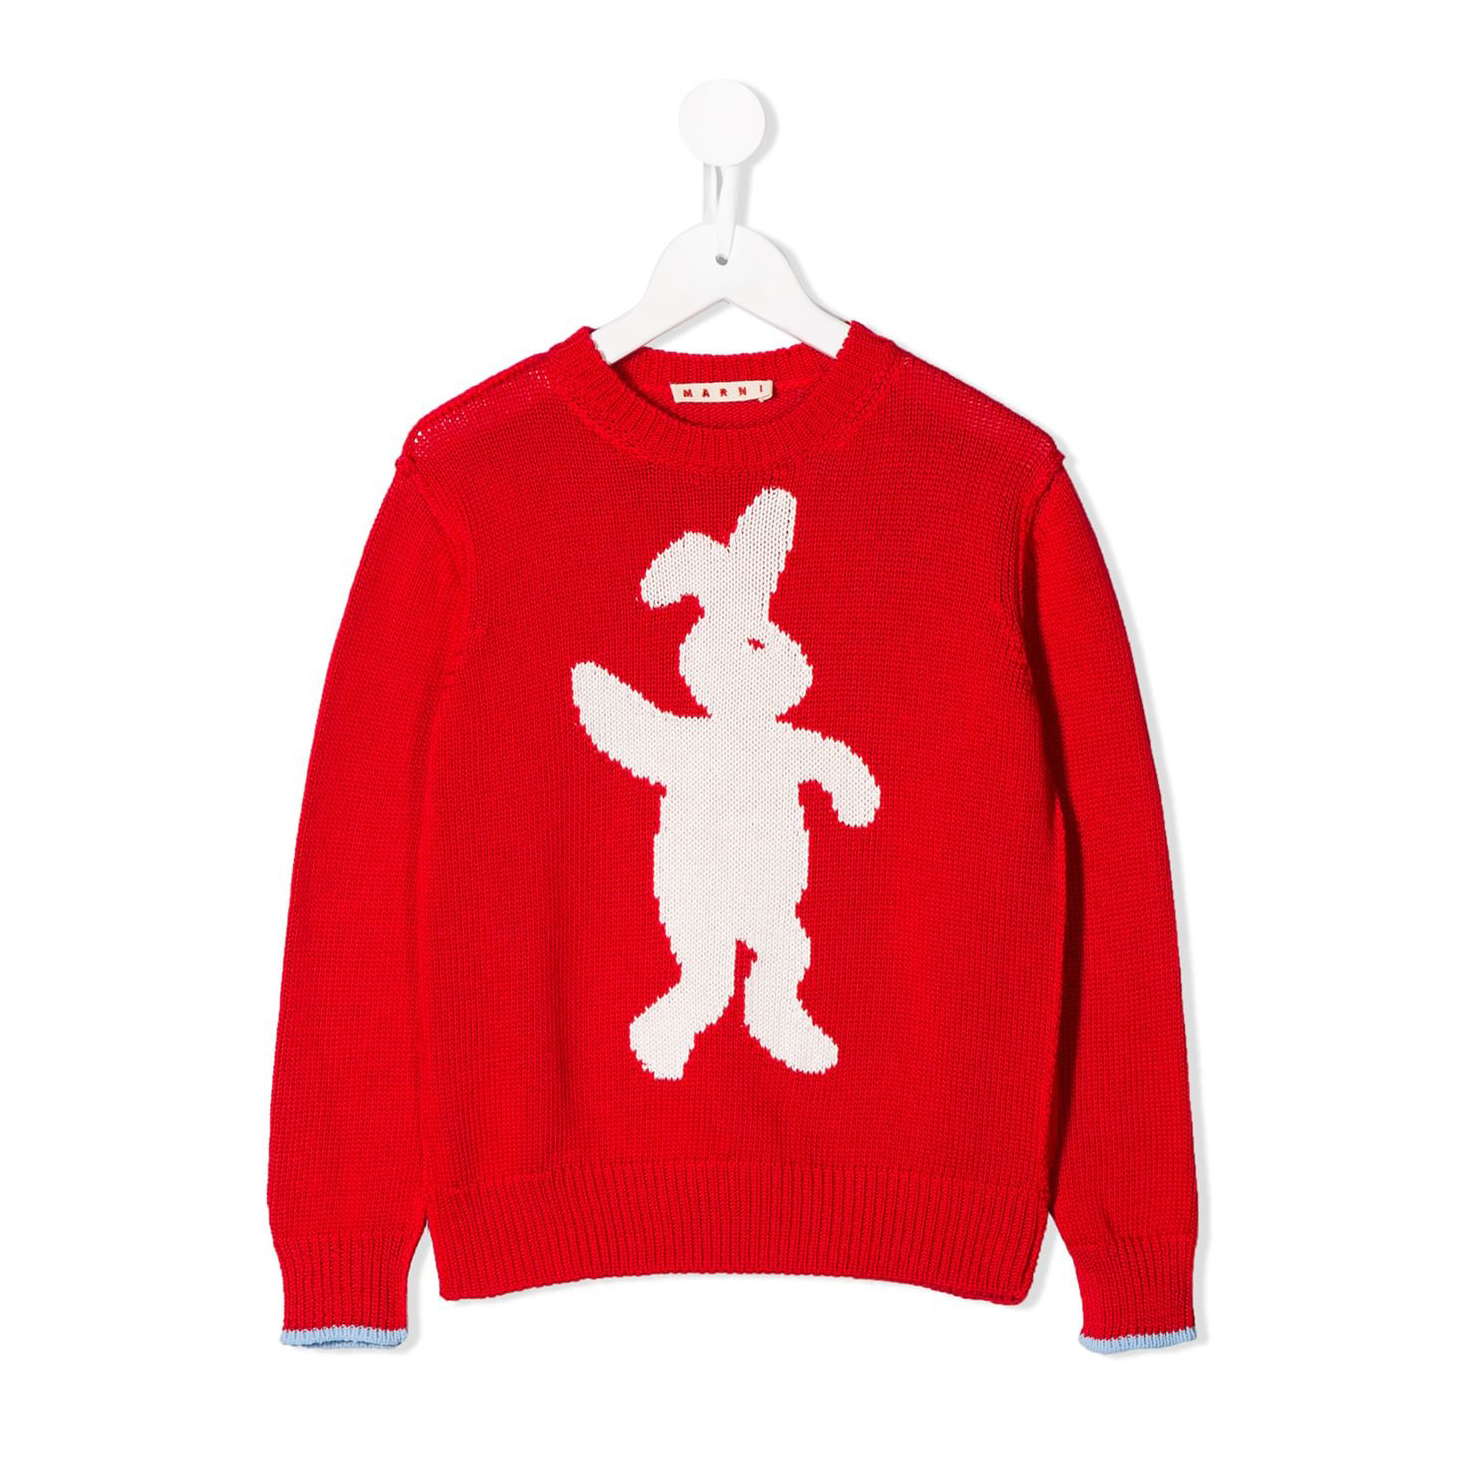 easter-bunny-stella-mccartney 9 Bunny-Centric Pieces for Kids In Honor of Easter